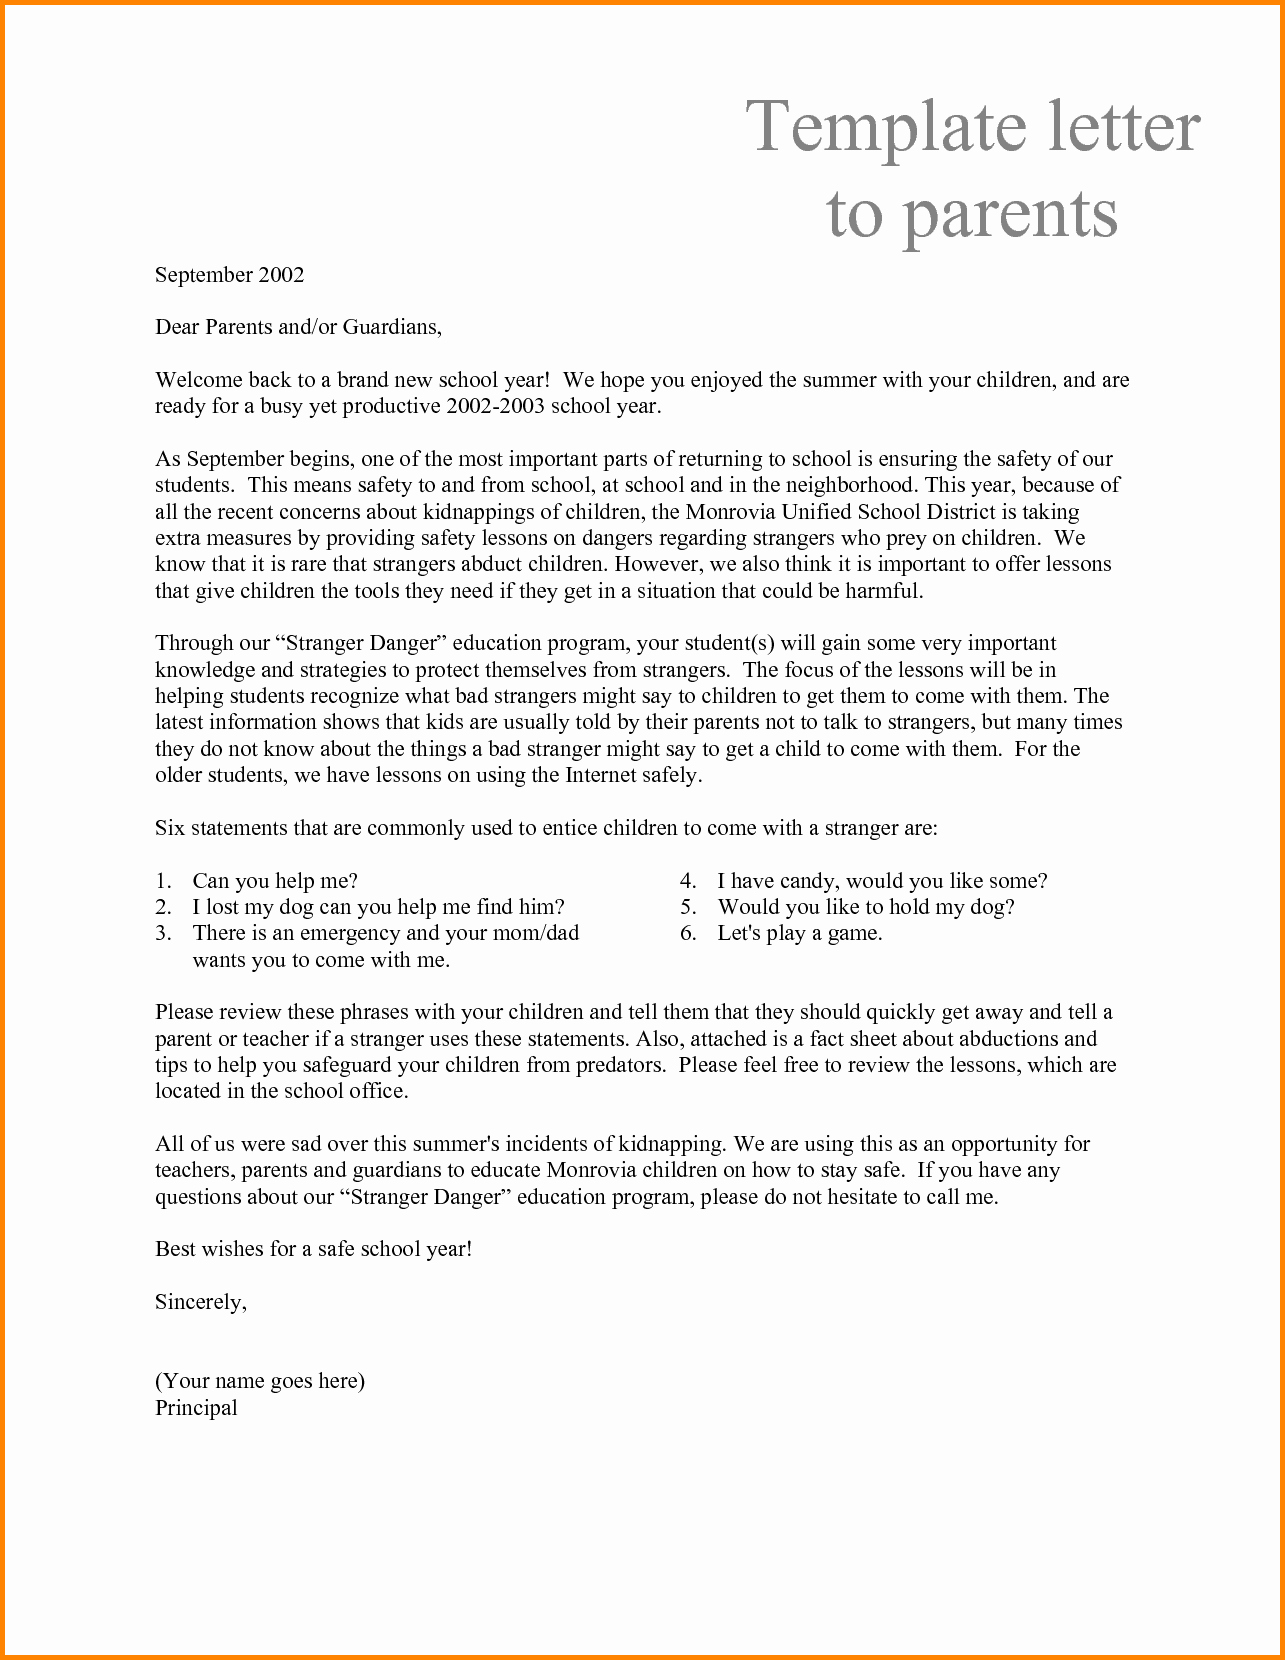 Letter to Parents Template Lovely 5 Teacher Resignation Letter to Parents Sample